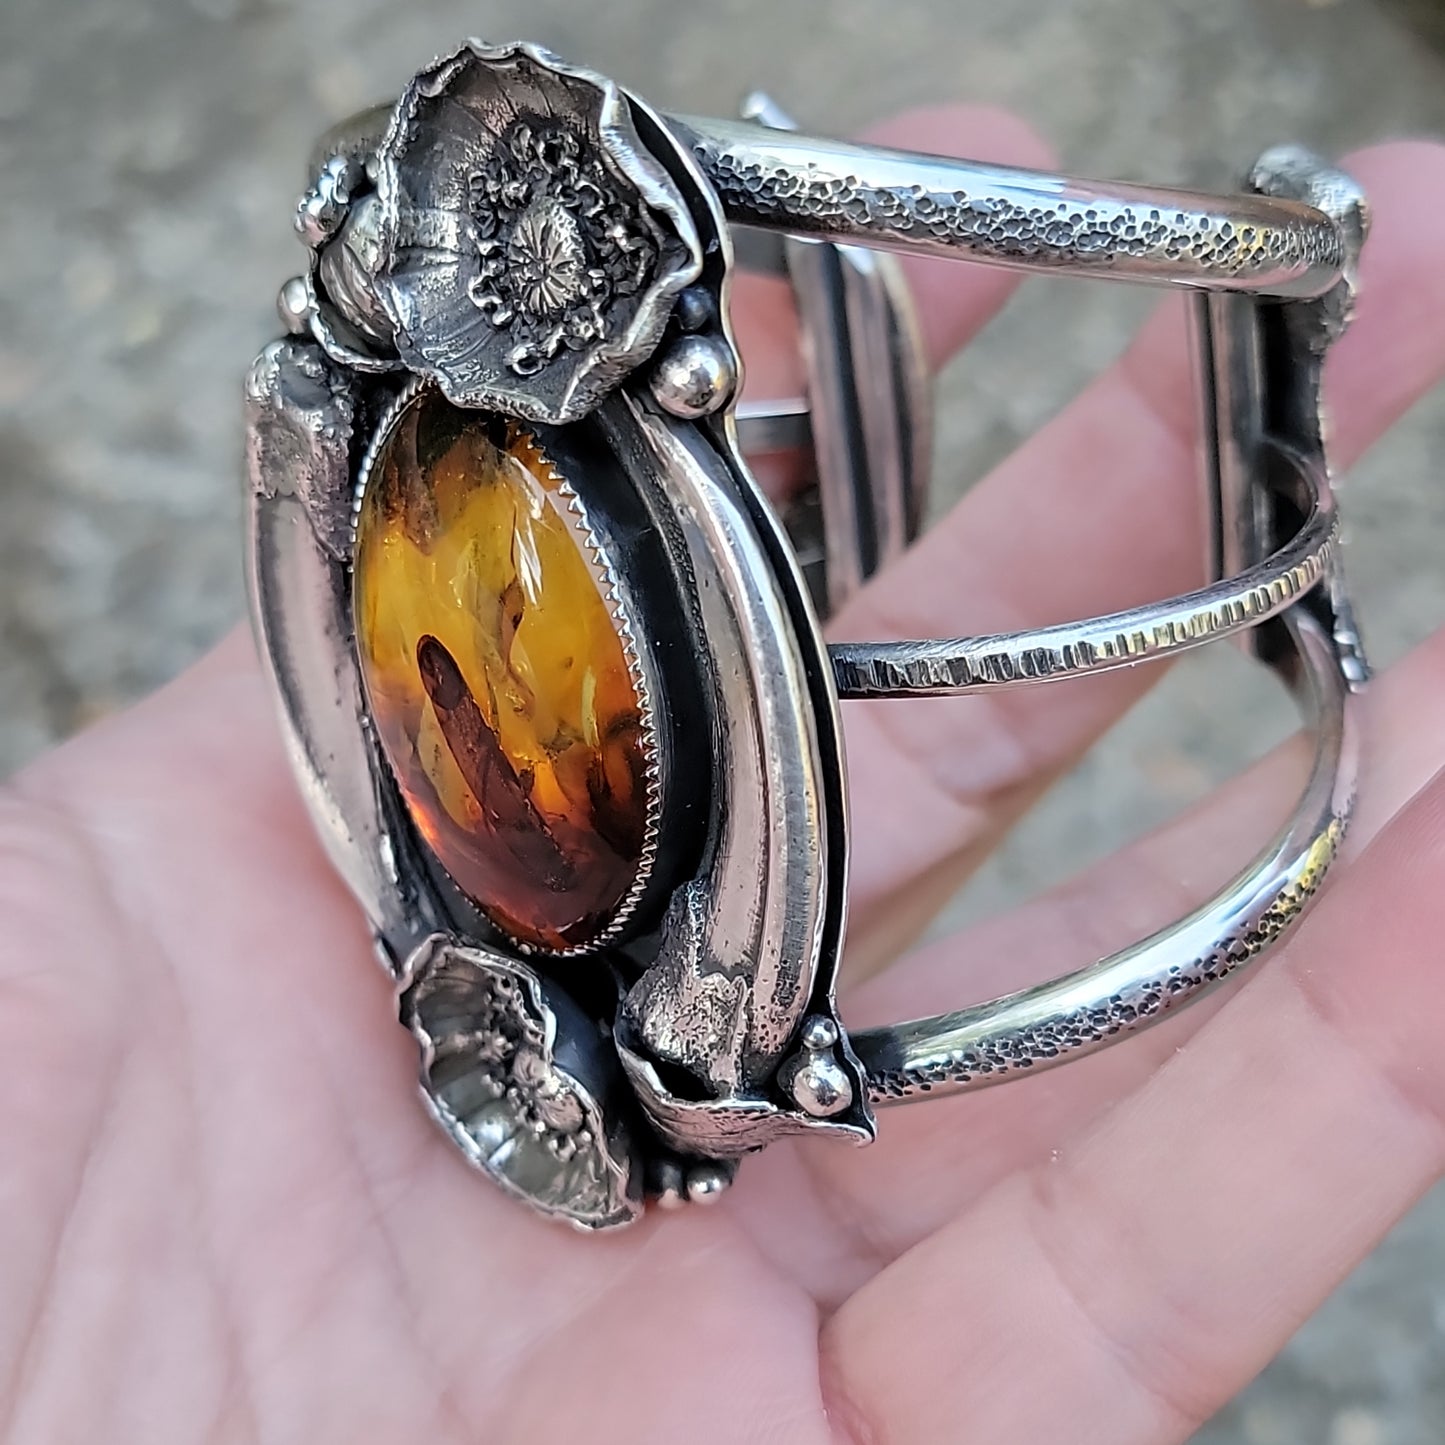 XX//POPPY CLAWS Cuff - Baltic Amber in Heavy Sterling Silver size M to M/L